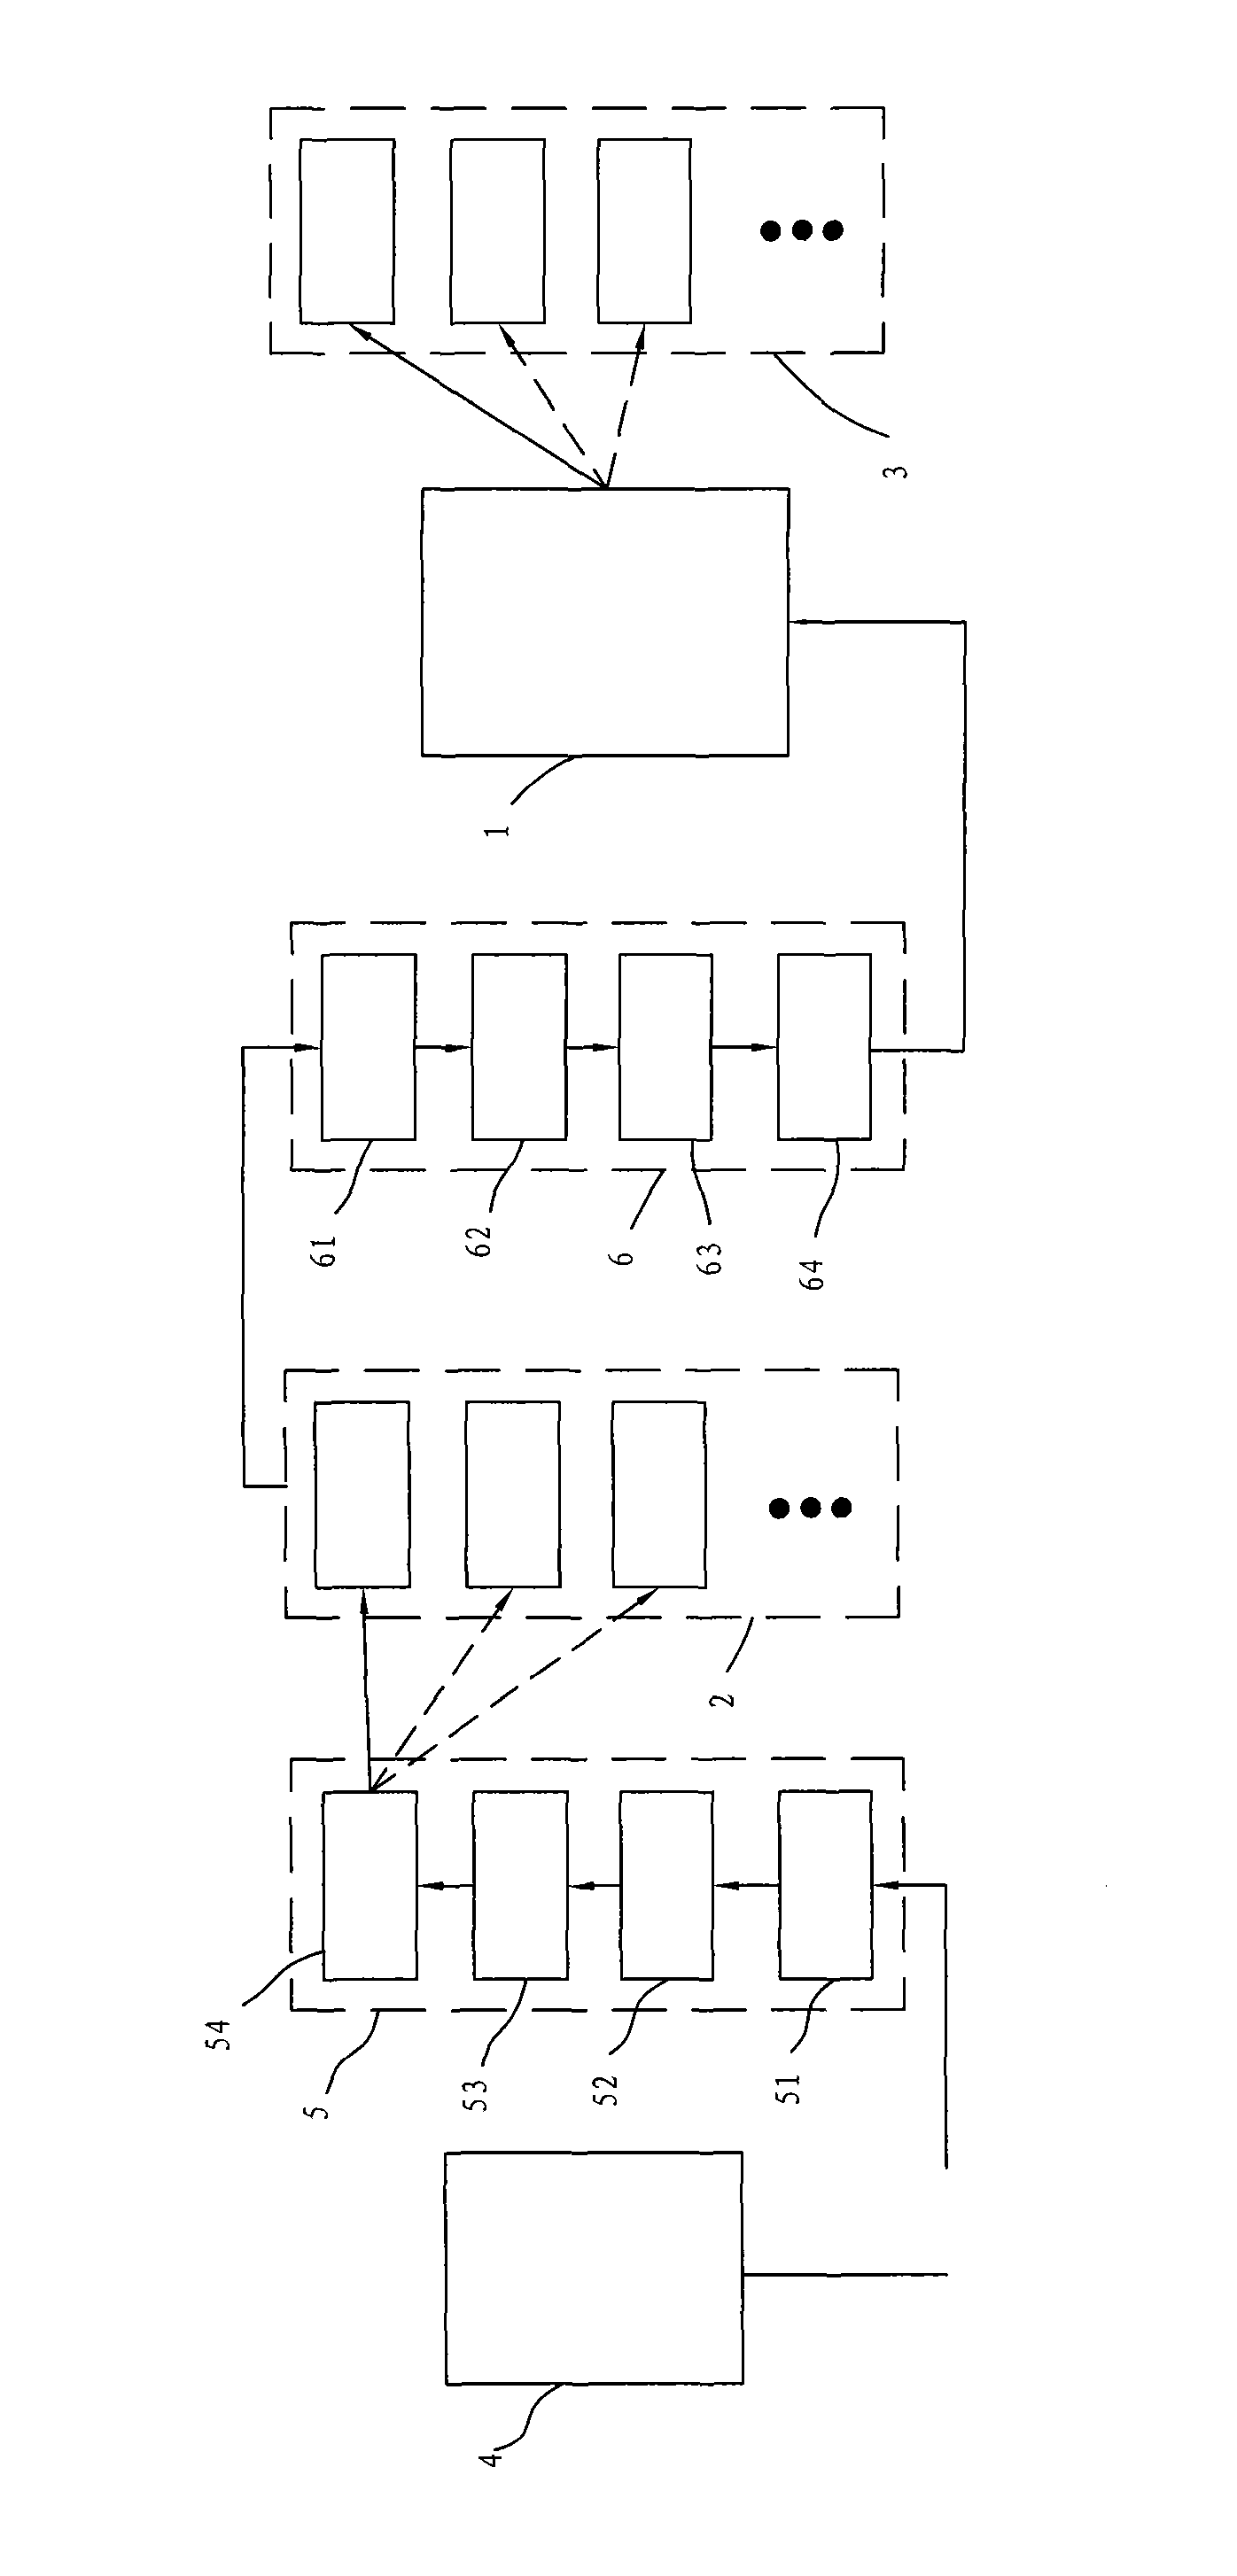 Automatic case distribution system